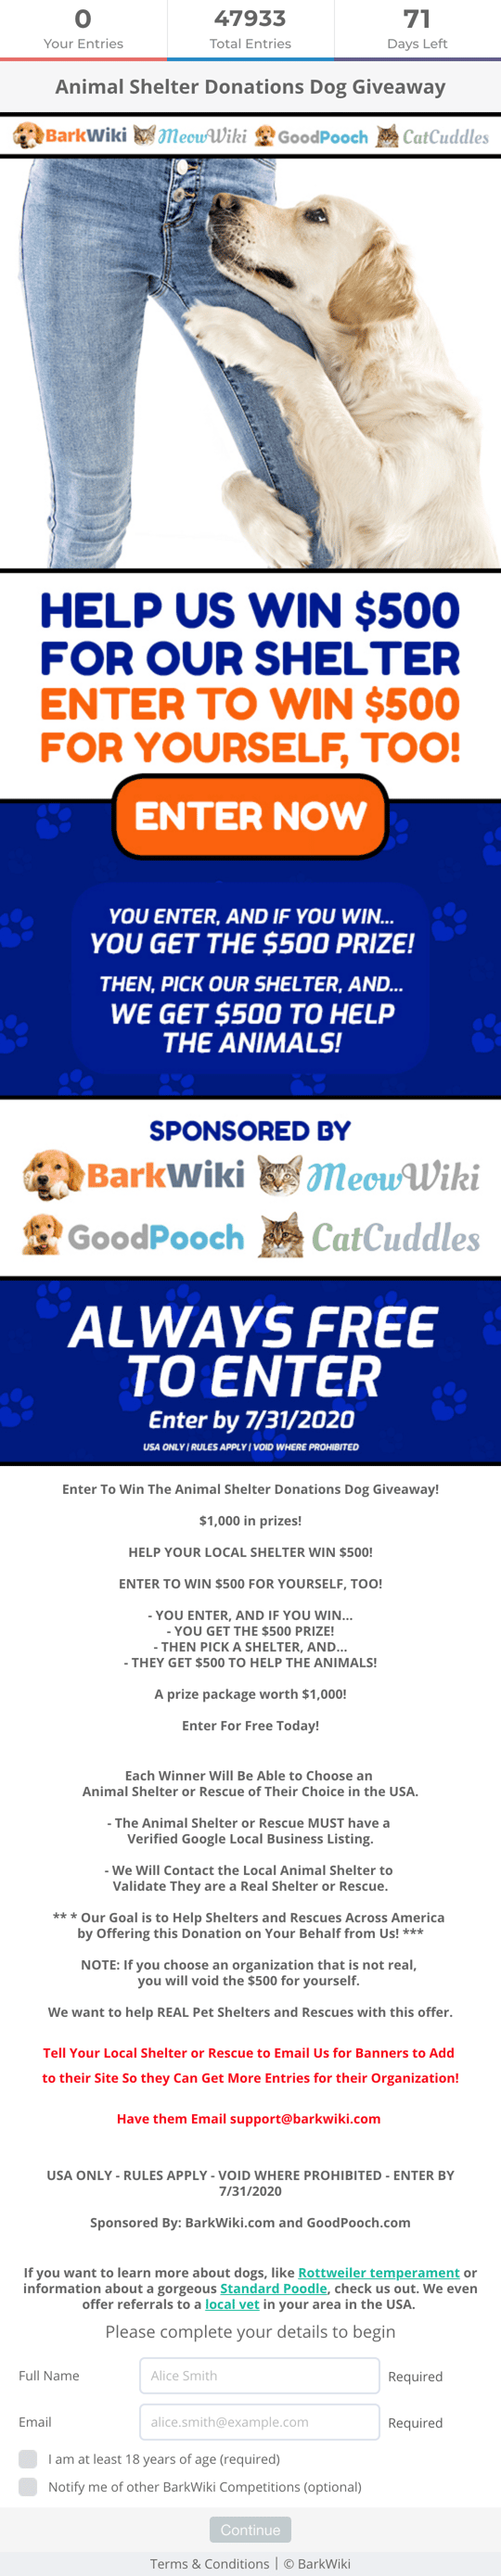 BarkWiki's Animal Shelter Donation giveaway campaign